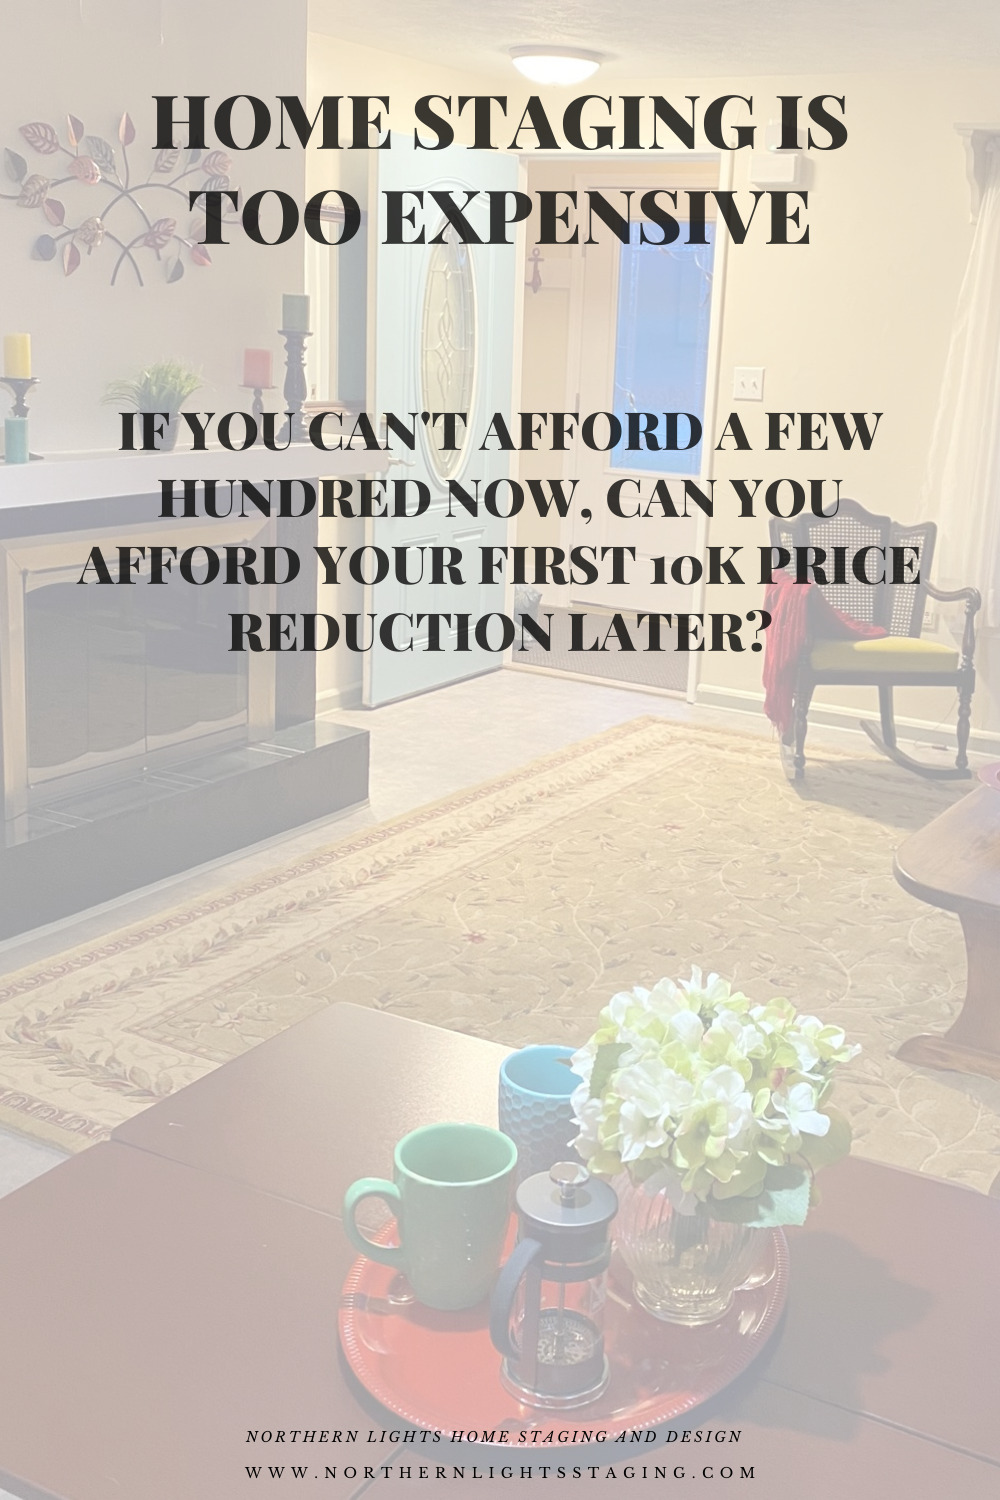 Saving Money on Home Staging will Cost You.